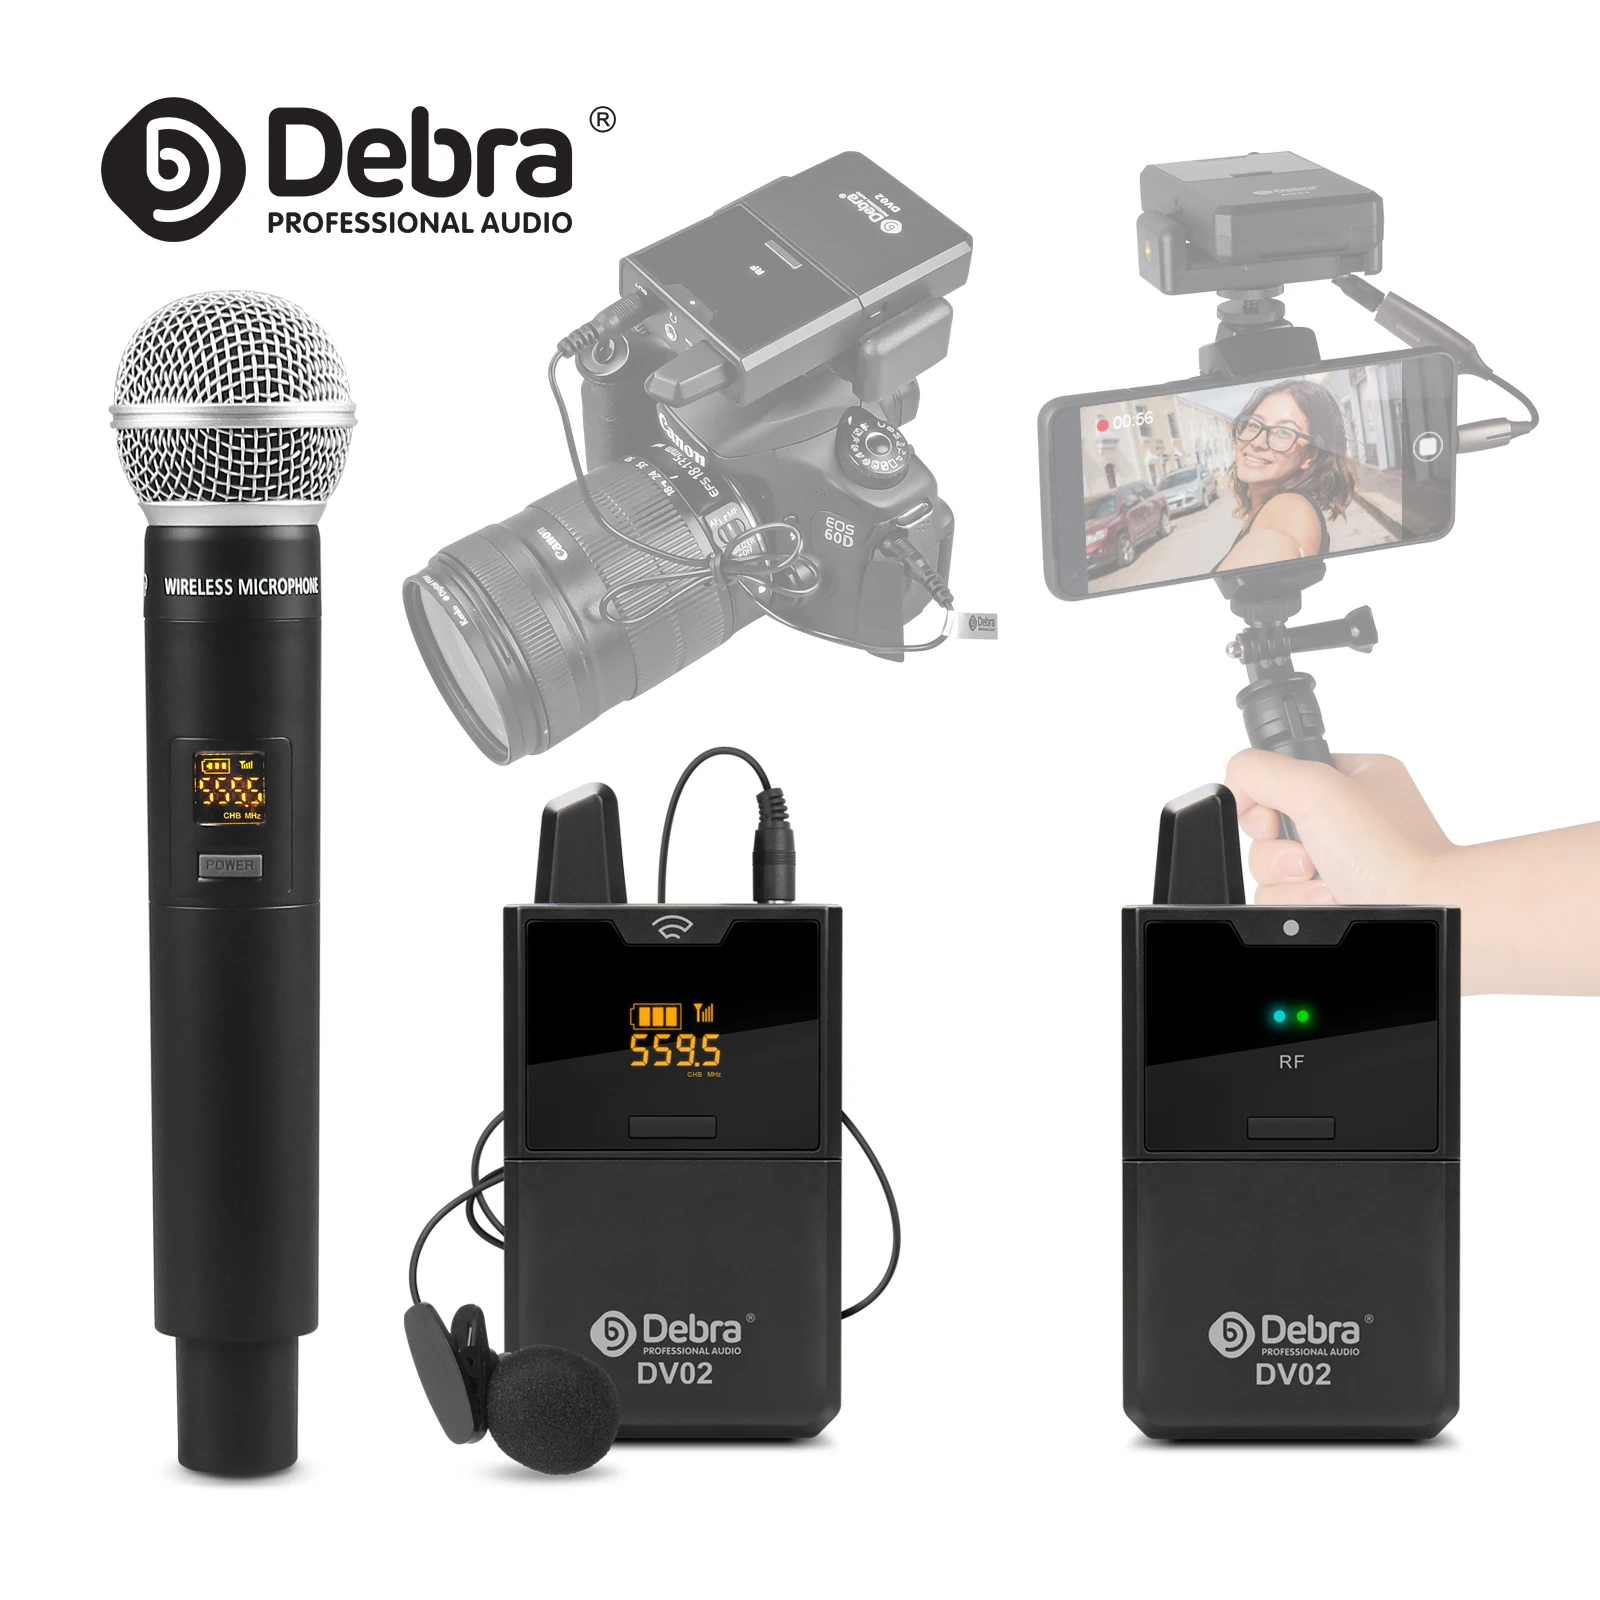 Debra DV UHF Wireless Lavalier/Handheld Microphone with Audio Monitor 50M Range For Phones DSLR Cameras Live Recording Interview